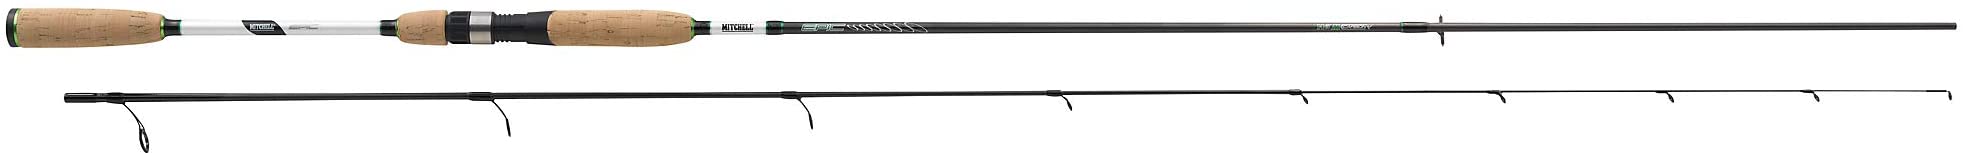 Mitchell Epic R Spinning Rod - Cork Handle, 30 Ton Carbon Spin Fishing Rod for Saltwater and Freshwater